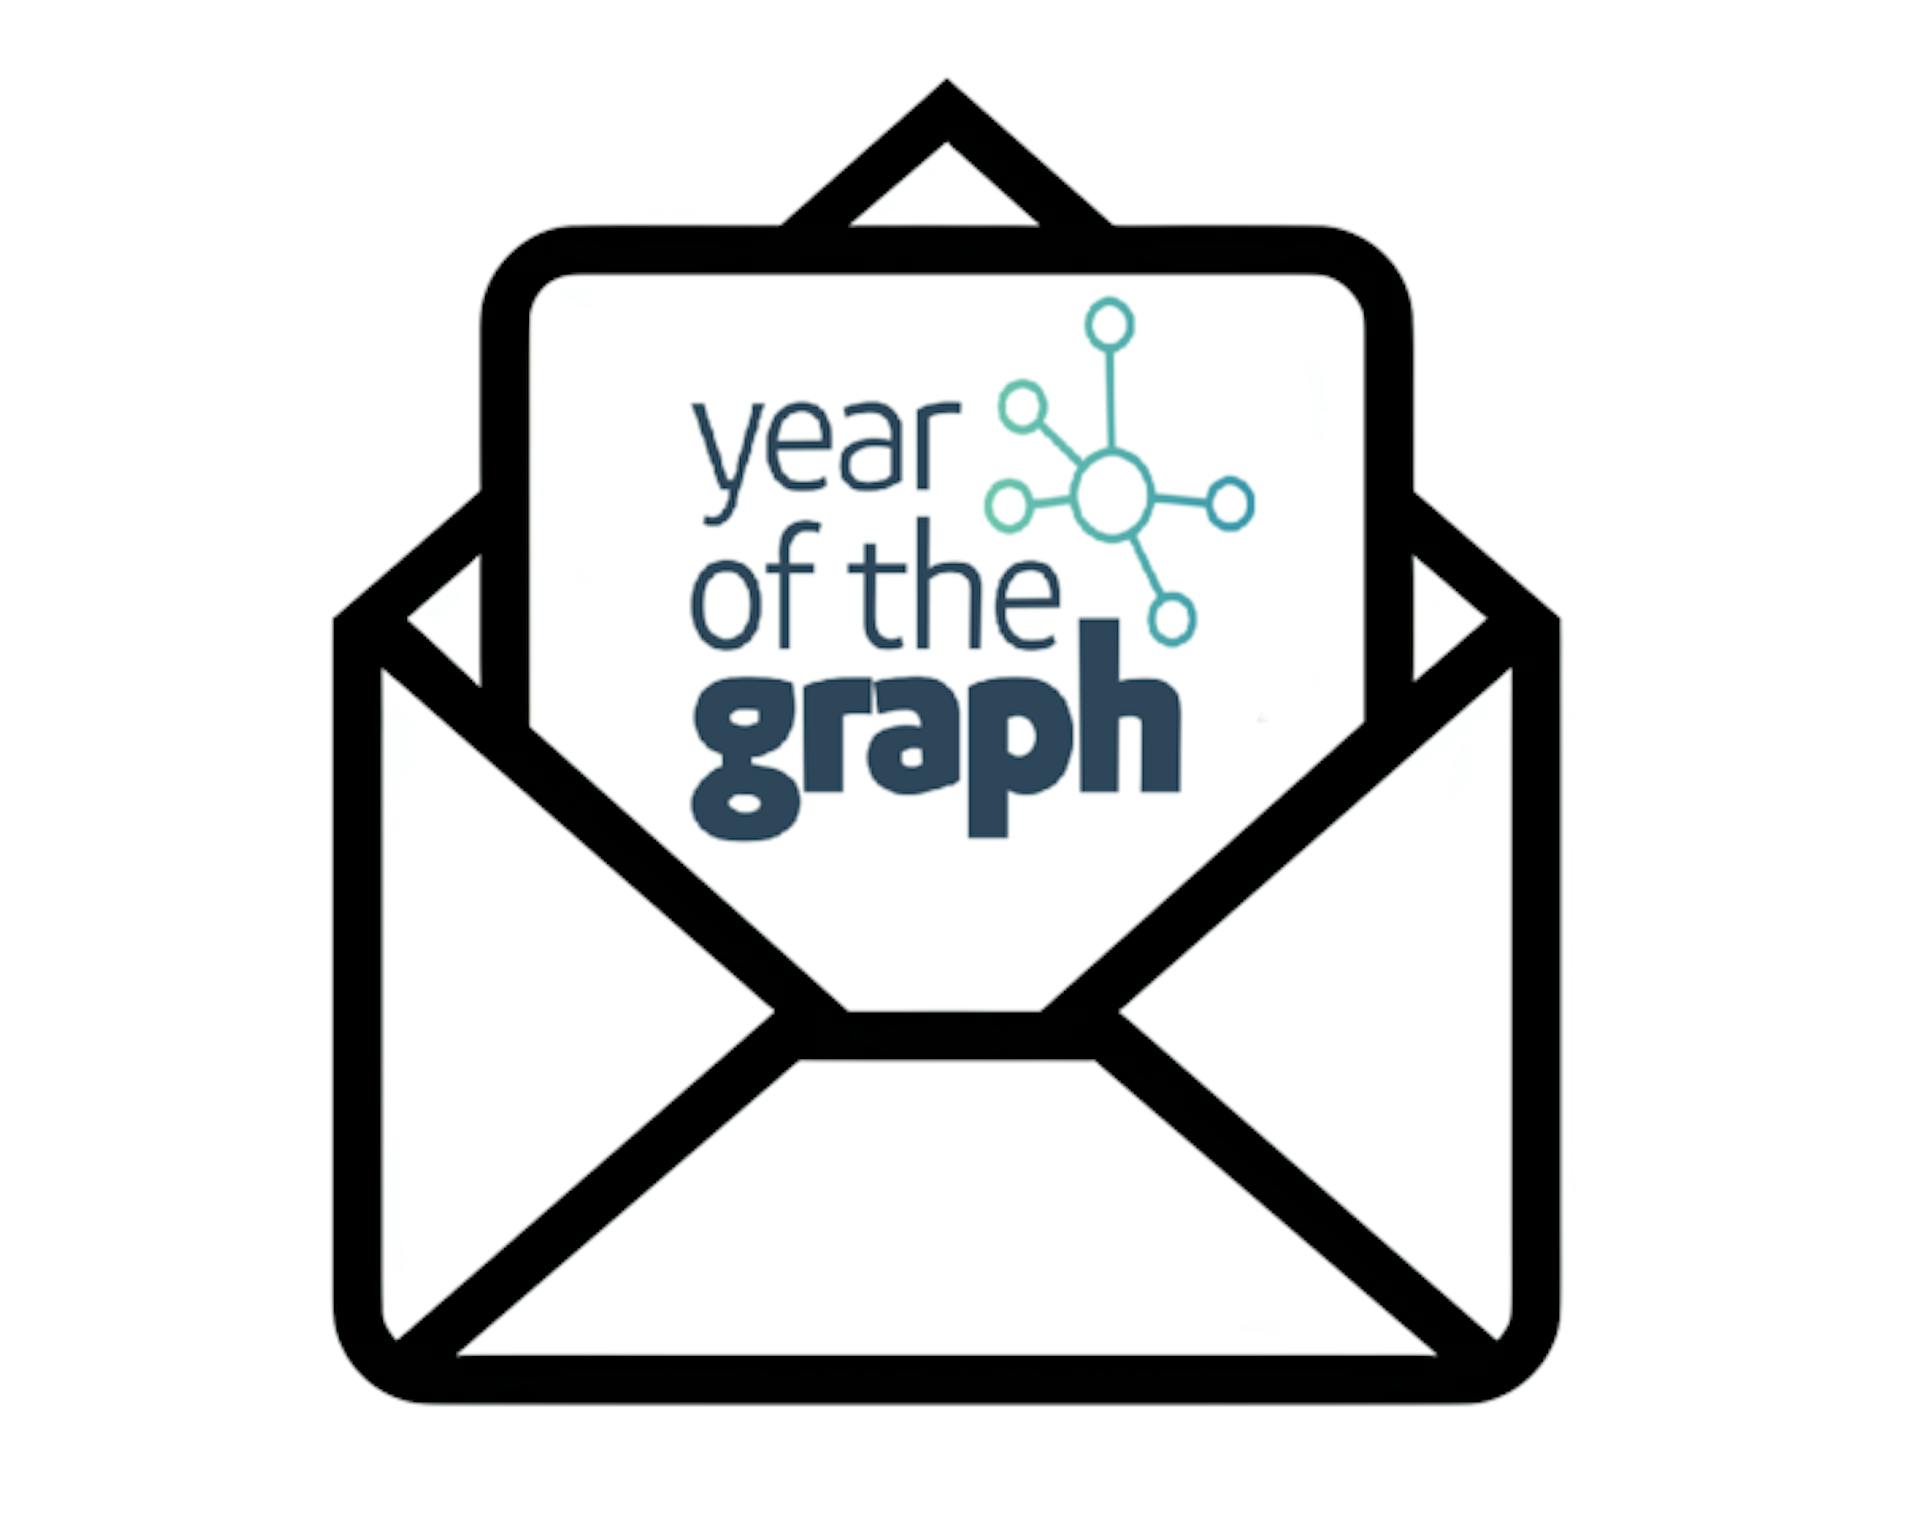 Keeping track of all things Graph Year over Year